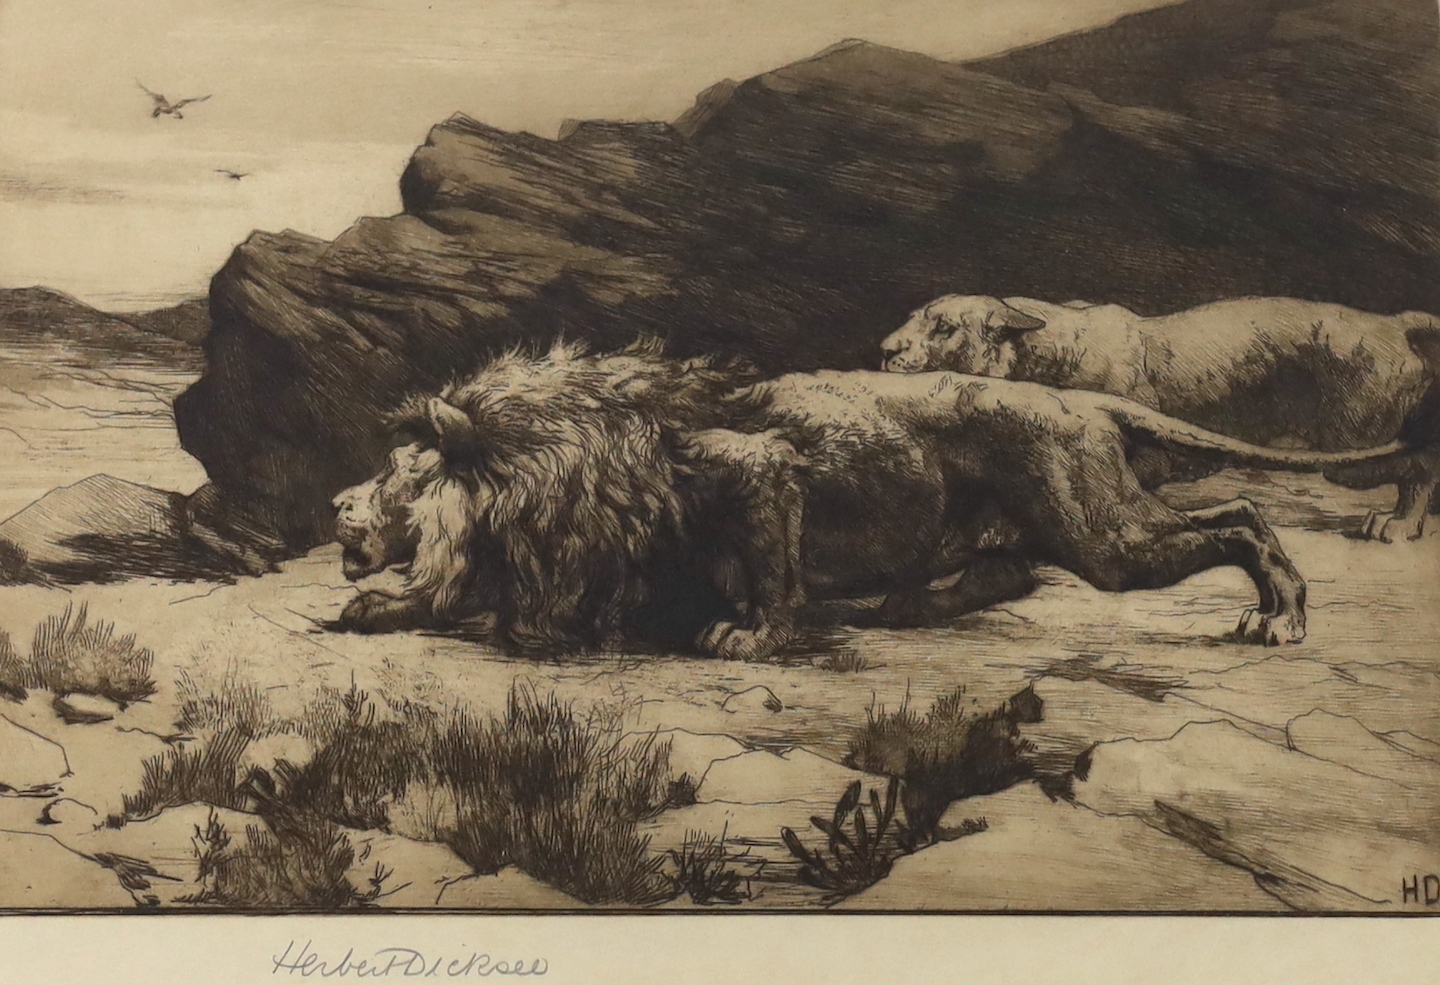 Herbert Dicksee (1862-1942), etching, 'The Marauders', signed in pencil, publ. 1890, exhibited in the Royal Academy 1894, 19 x 26cm